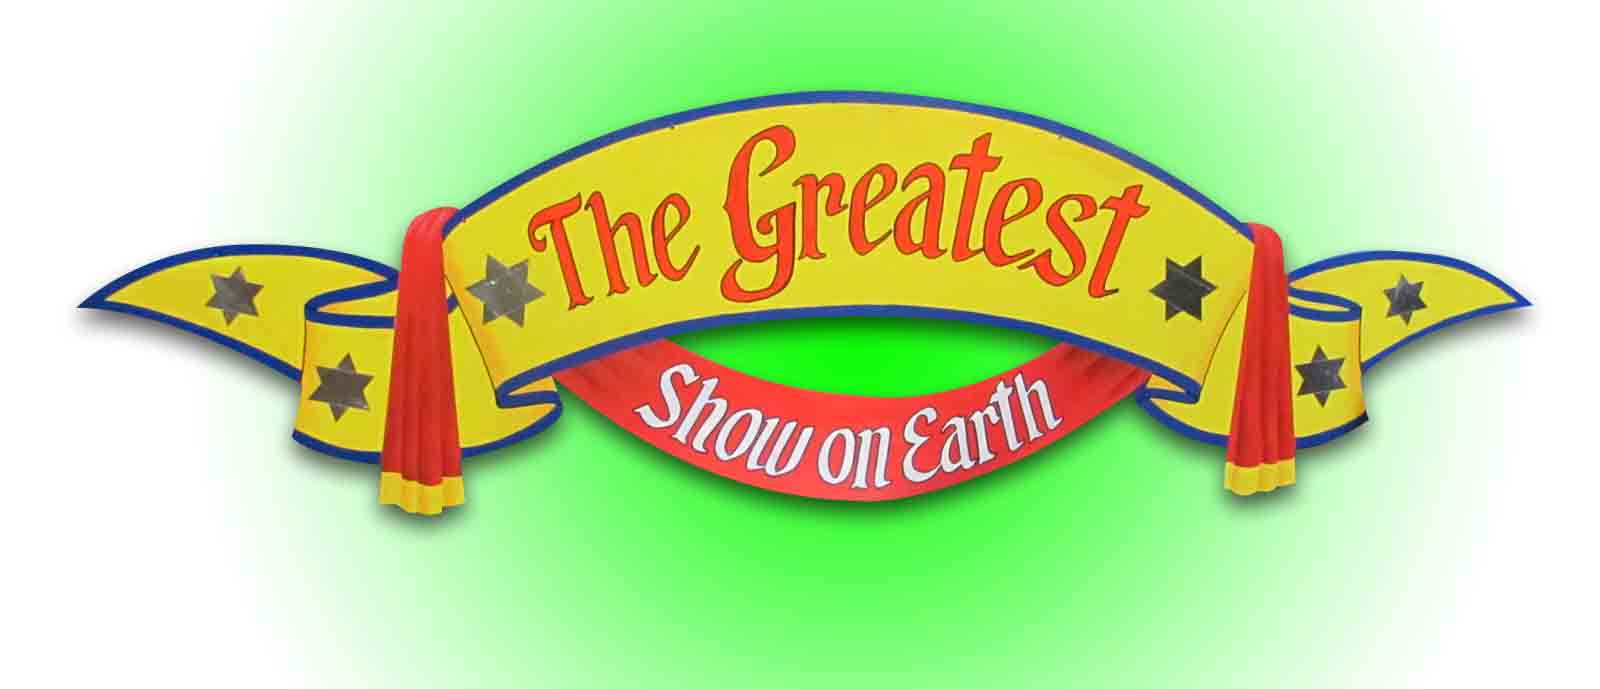 “The Greatest Show On Earth” Circus Sign (W: 2.1m x H: 0.6m)